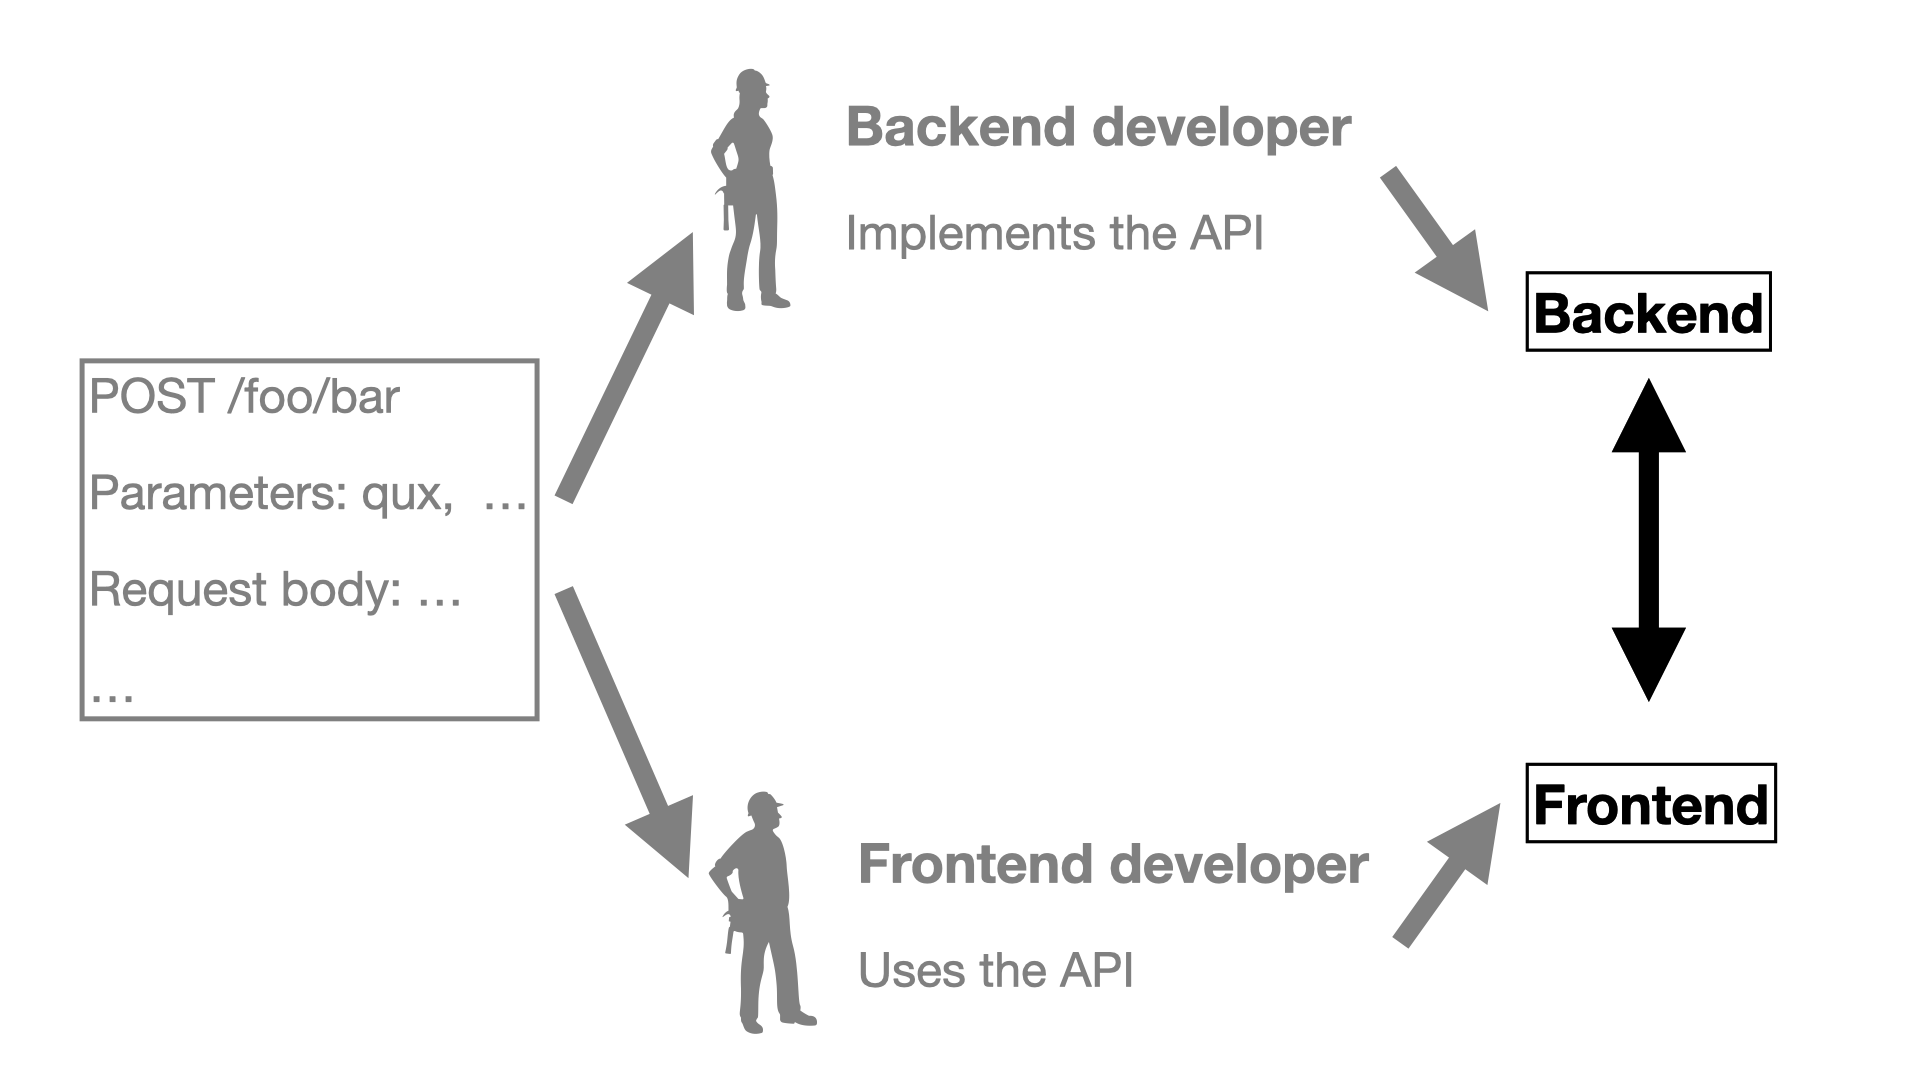 Backend and frontend developers implement the API their own way